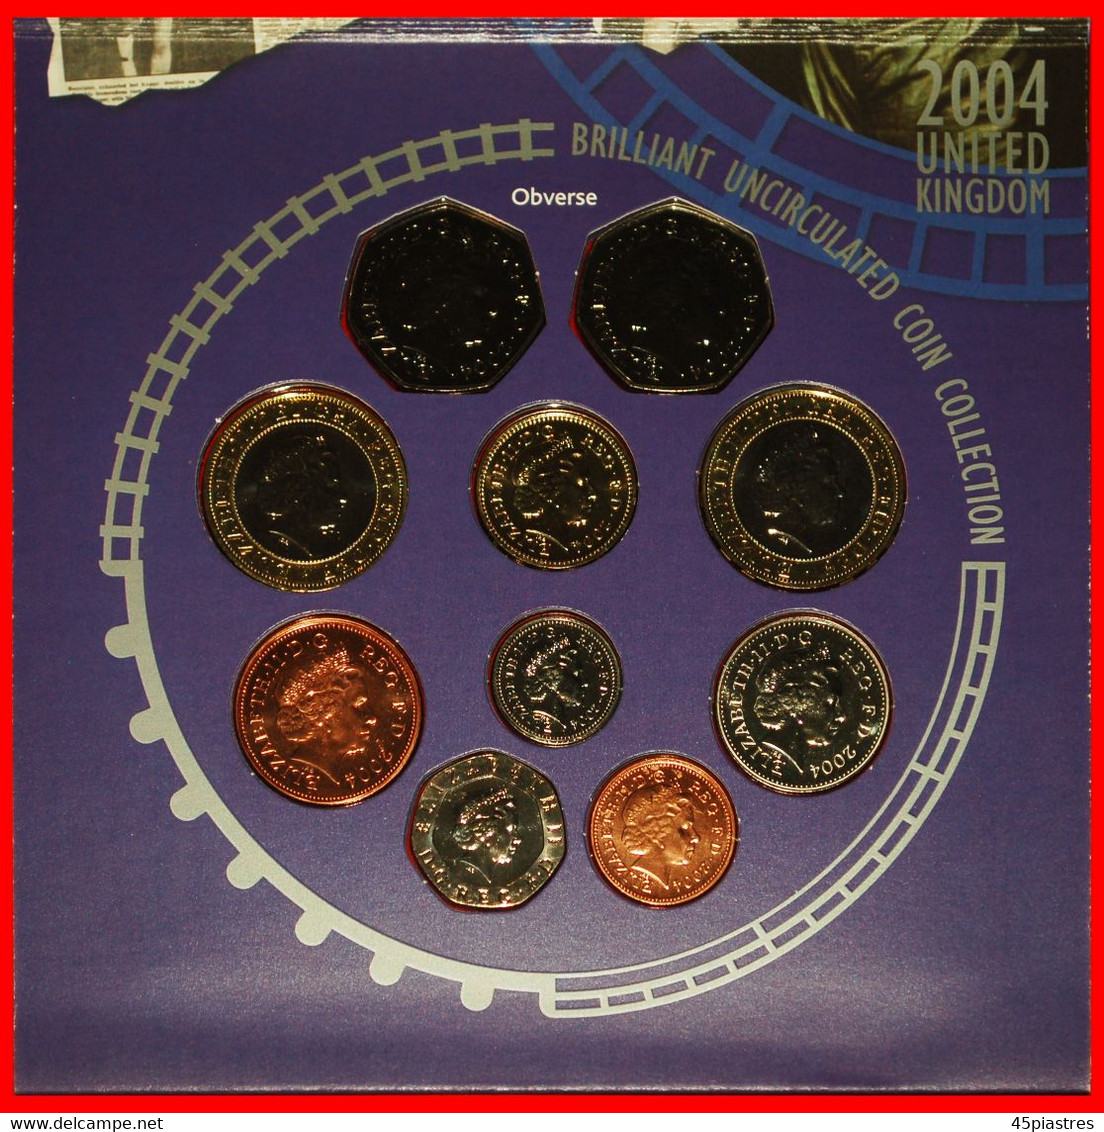 * RARE COMPLETE SET: GREAT BRITAIN ★ BRILLIANT UNCIRCULATED COIN COLLECTION 2004! UNITED KINGDOM★LOW START ★ NO RESERVE! - Mint Sets & Proof Sets